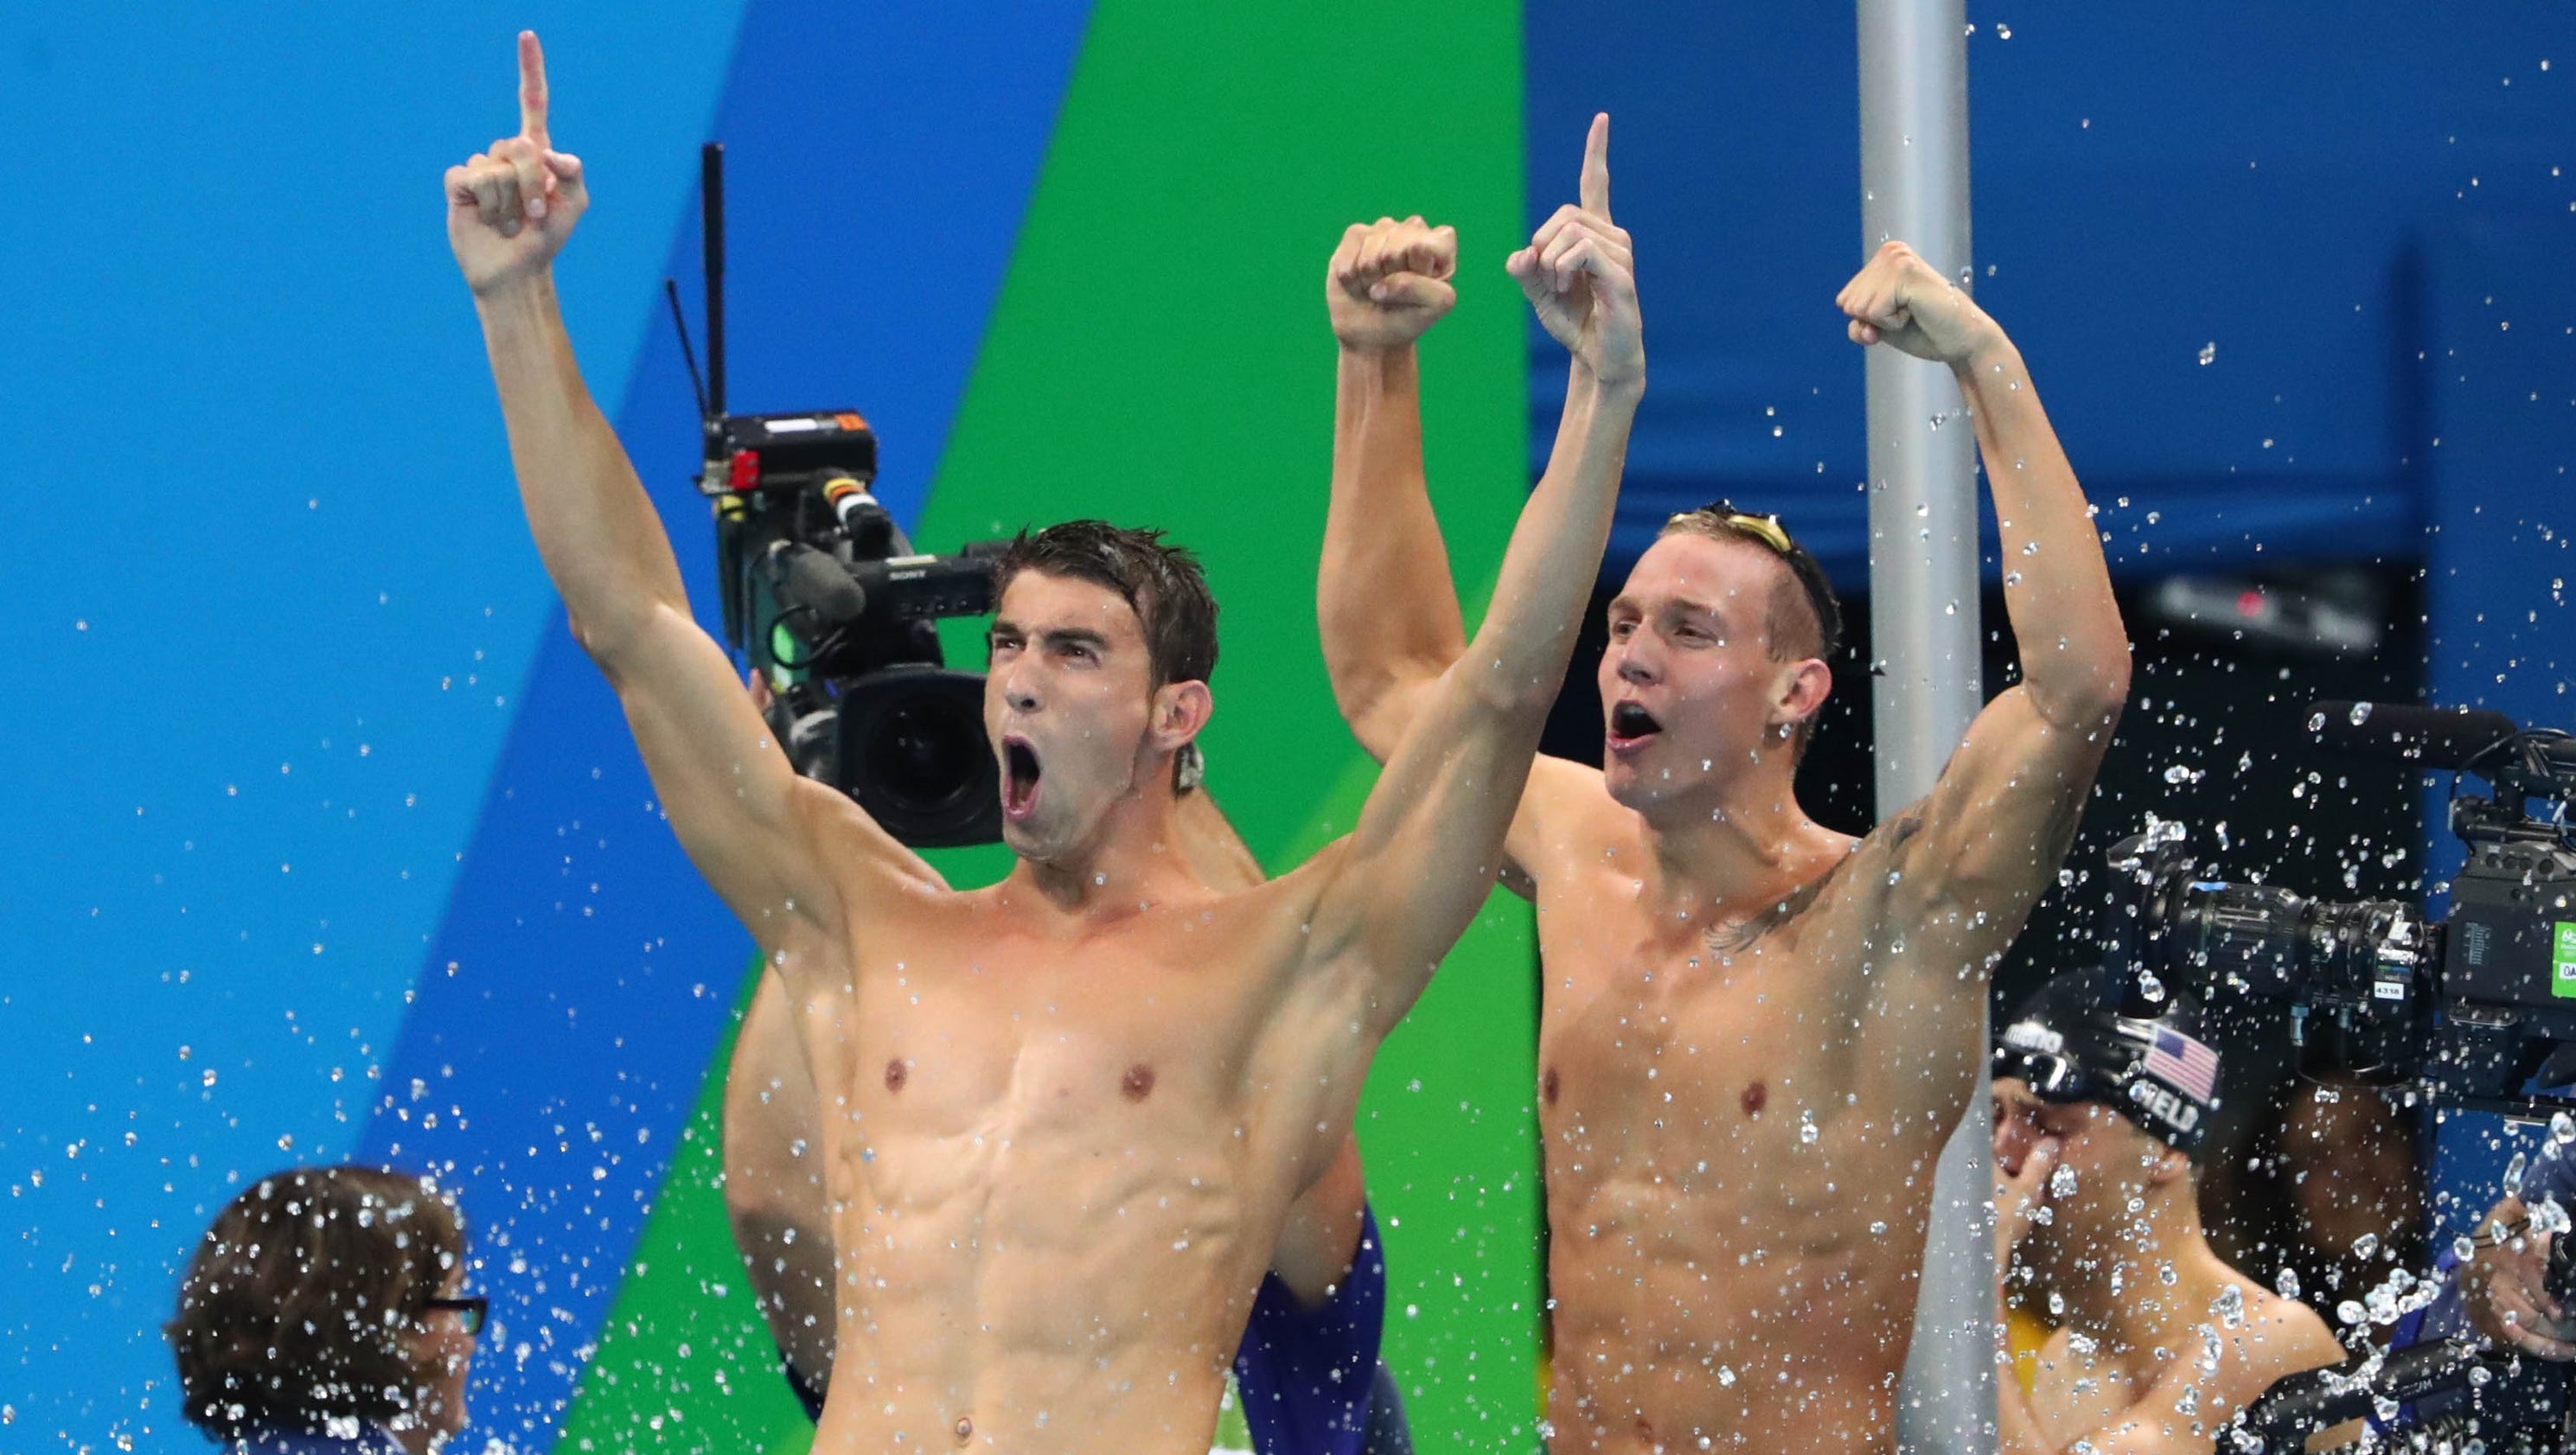 Led by Michael Phelps, U.S. men win gold in 400 freestyle relay